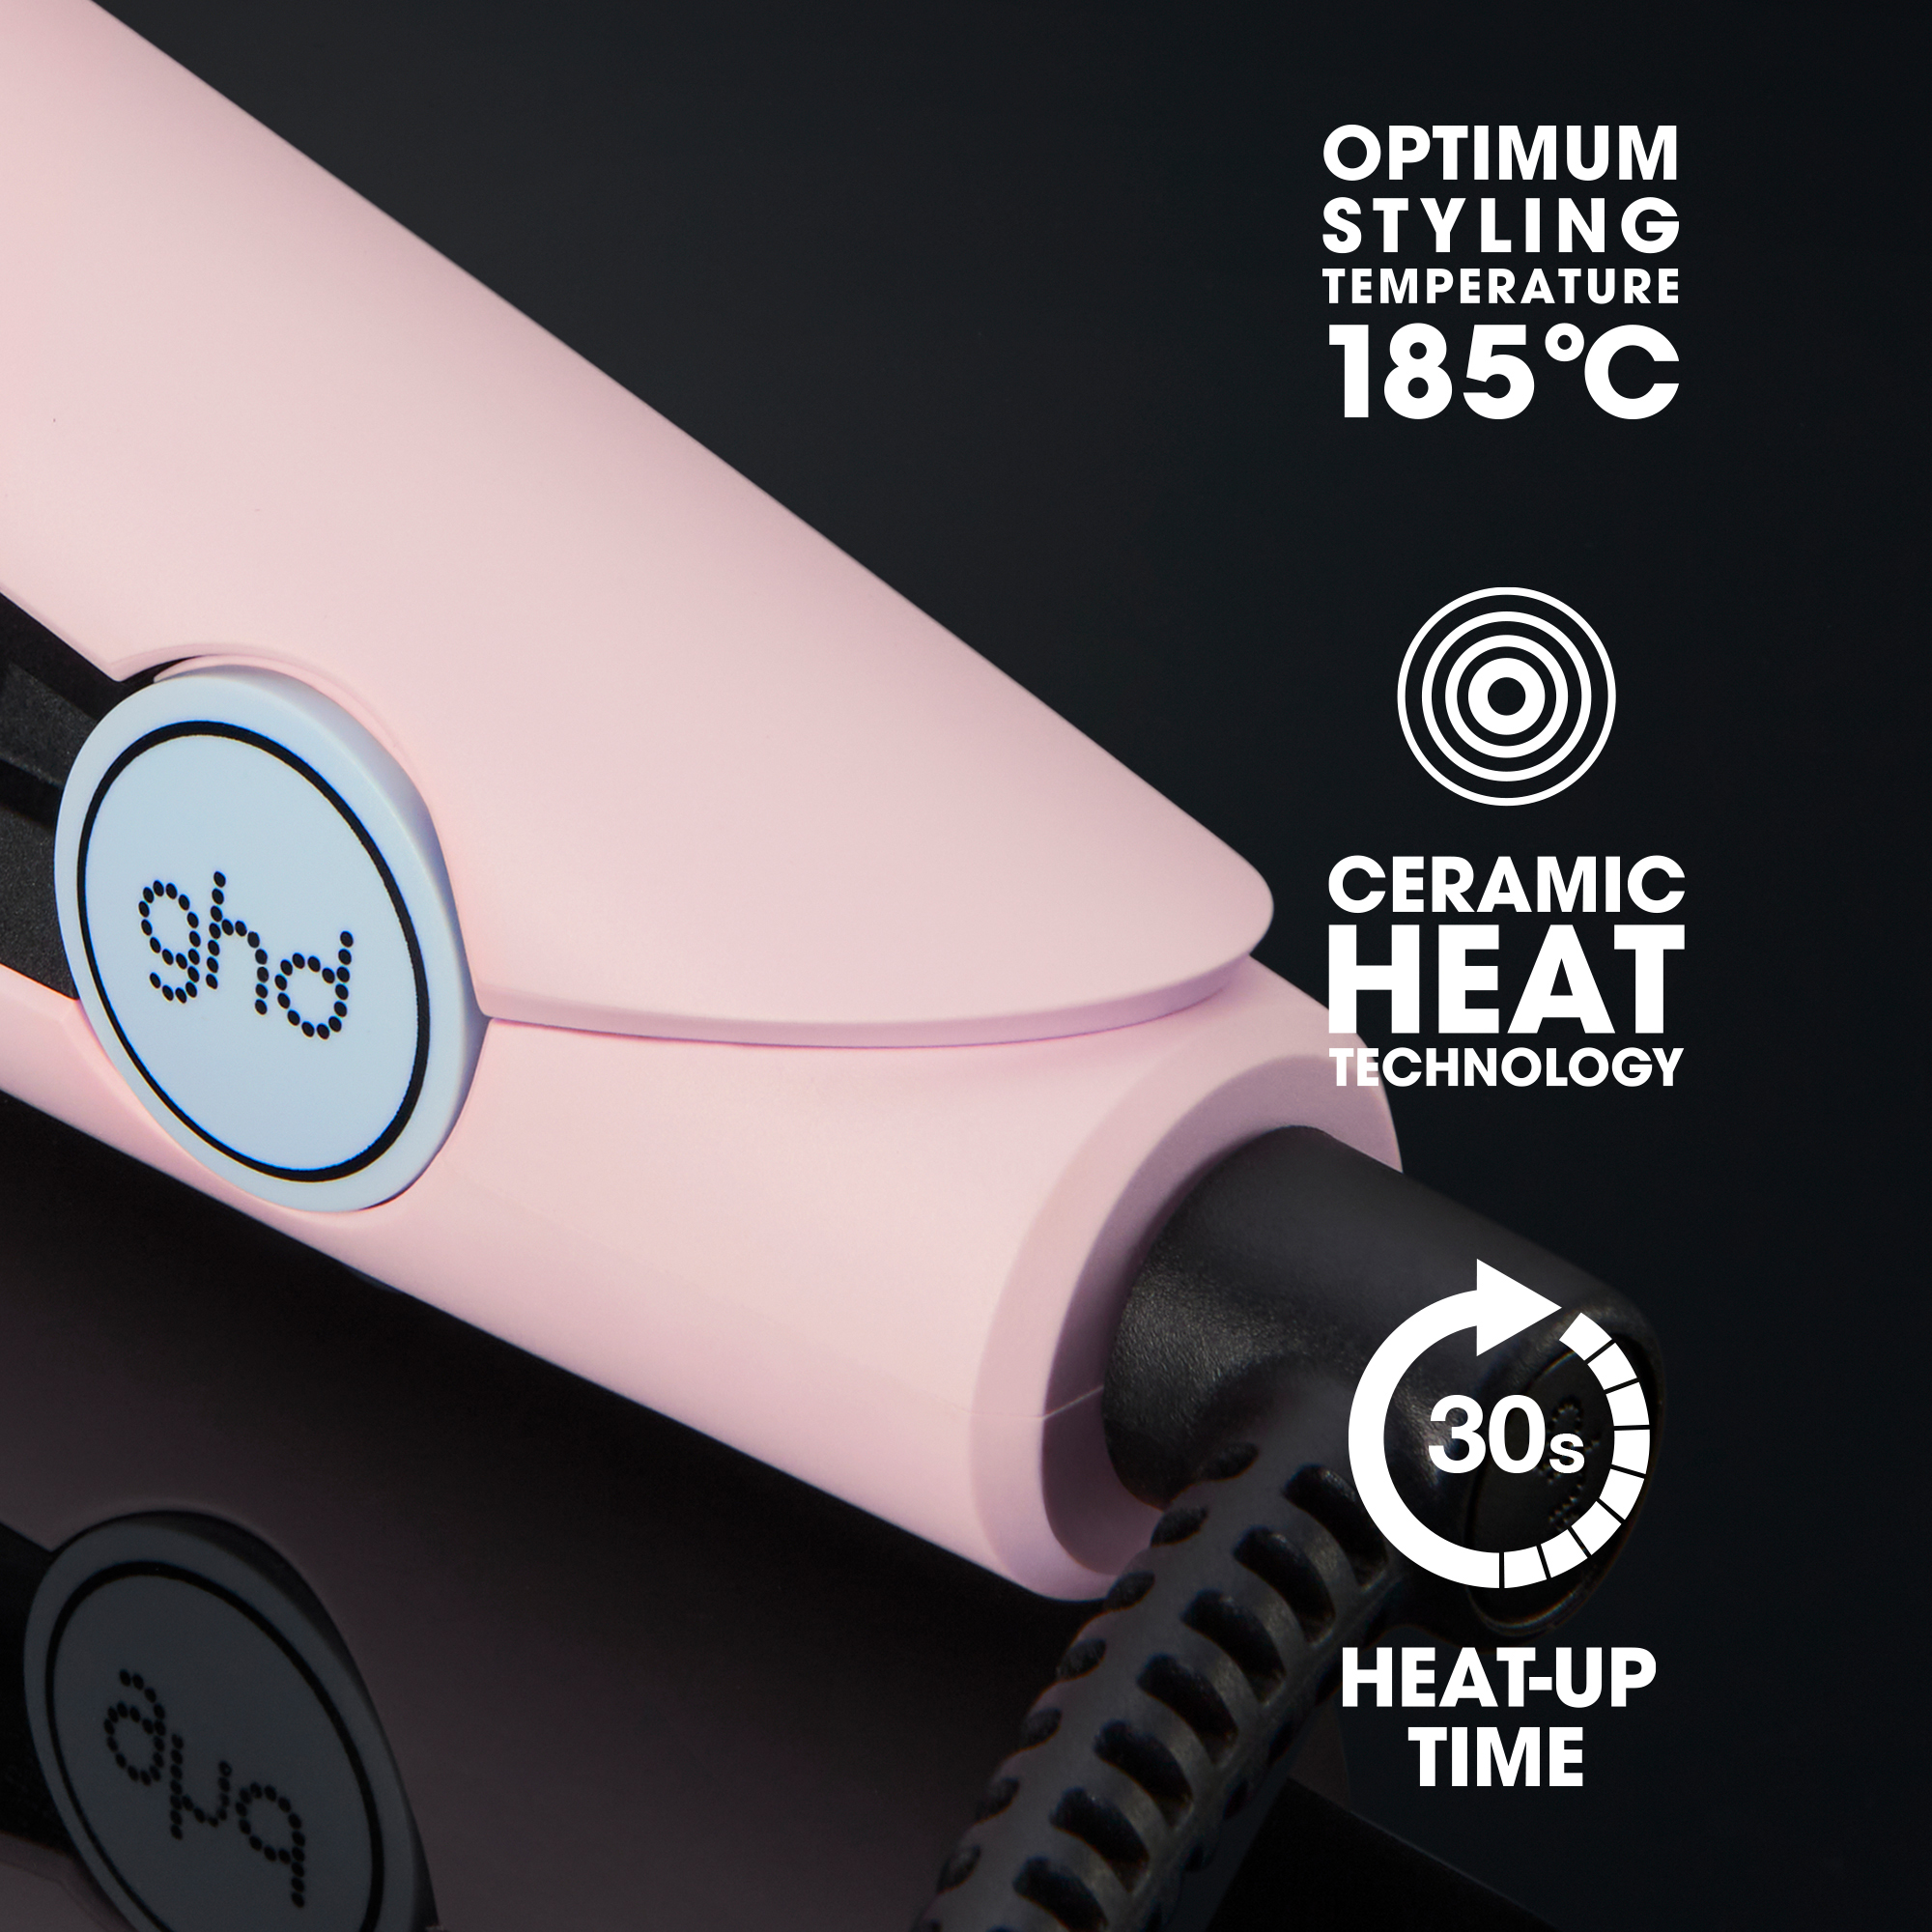 Optimum styling temperature 185 degrees. Ceramic heat technology. 30 seconds heat up time